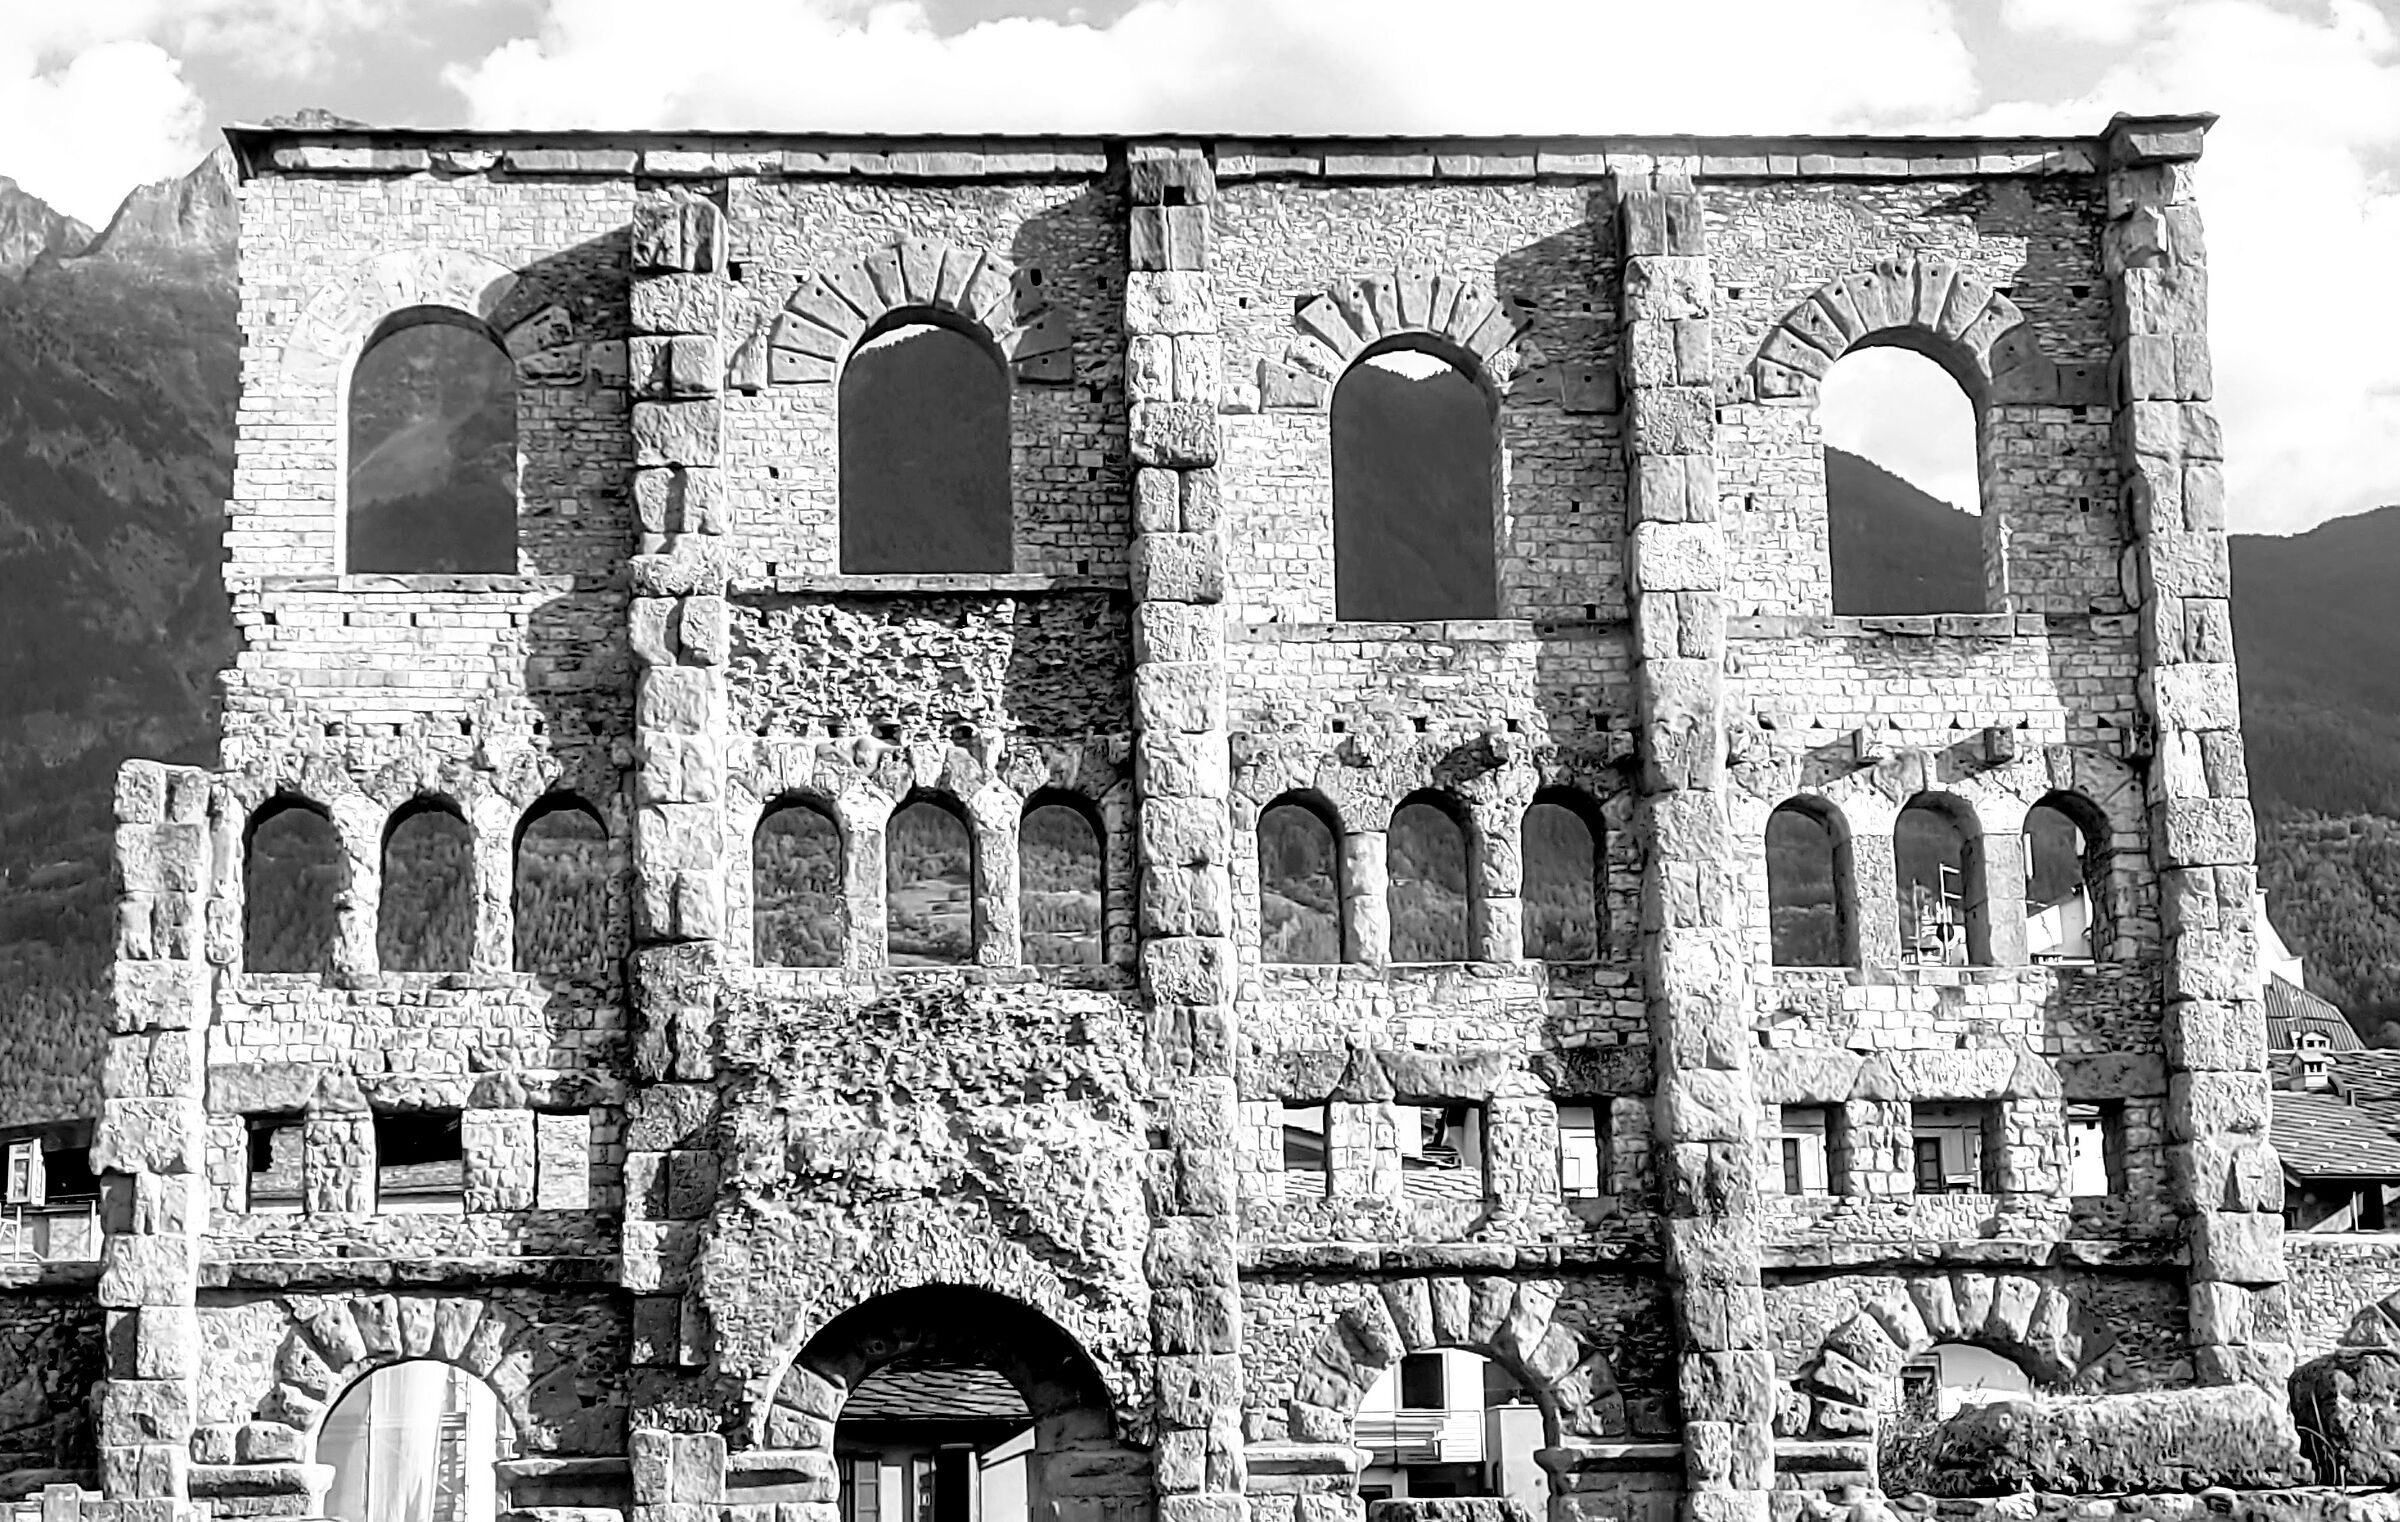 Aosta, remains of the Roman theater, with mobile phone...